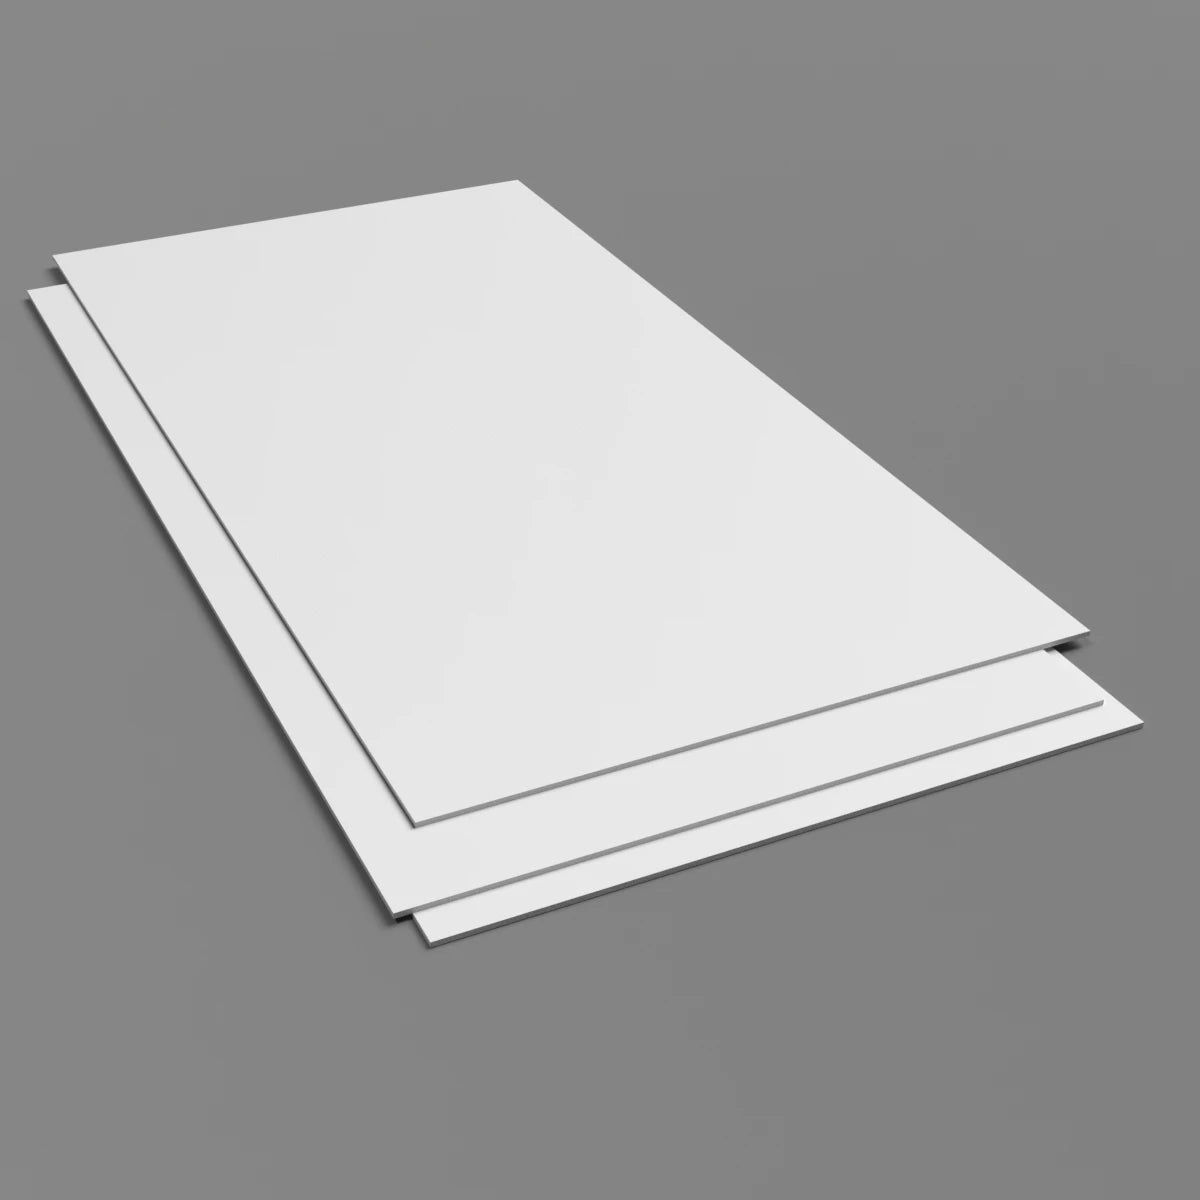 10mm Single Faced White Hygienic Wall Cladding Sheet